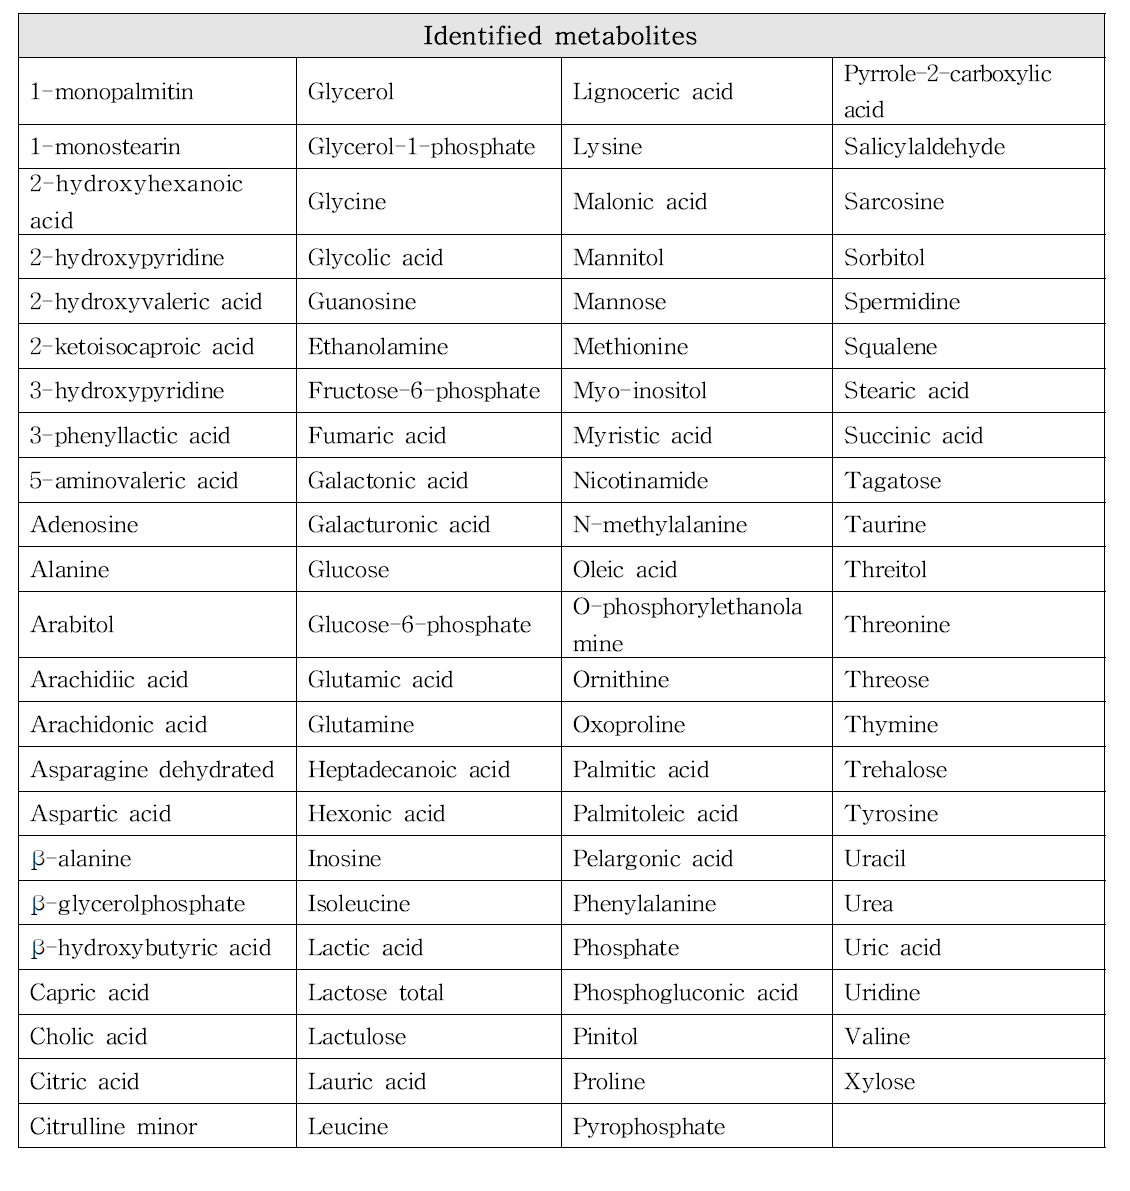 The list of structurally identified metabolites